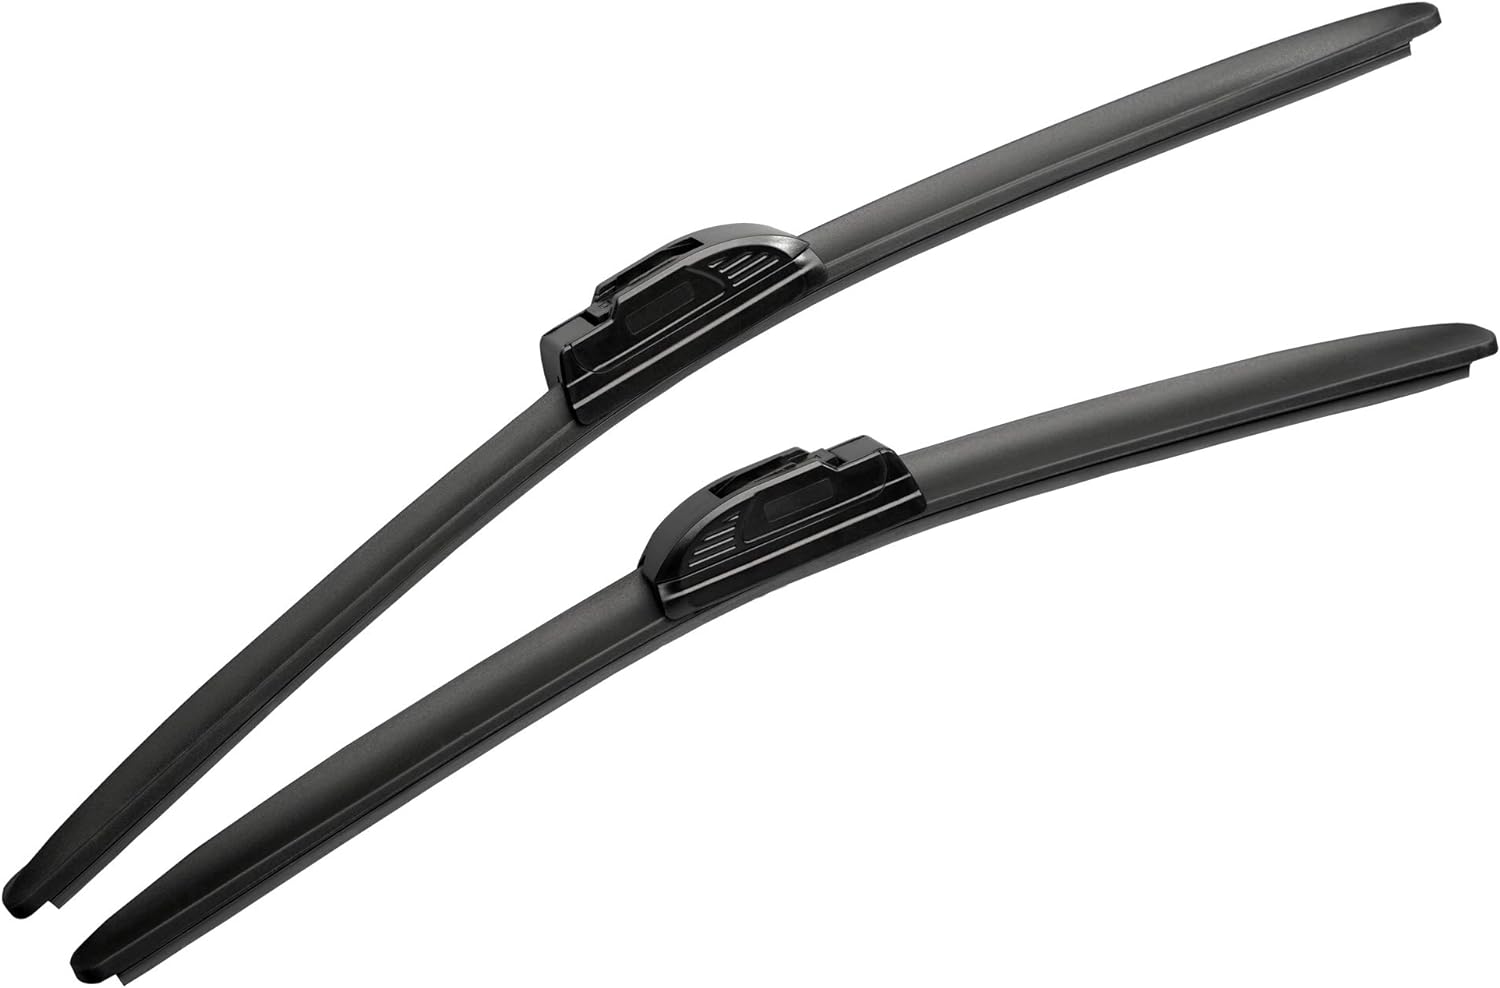 MOTIUM 19"+19" Super Silicone Windshield Wiper Blades, Fit for J hook Wiper Arms (set of 2)